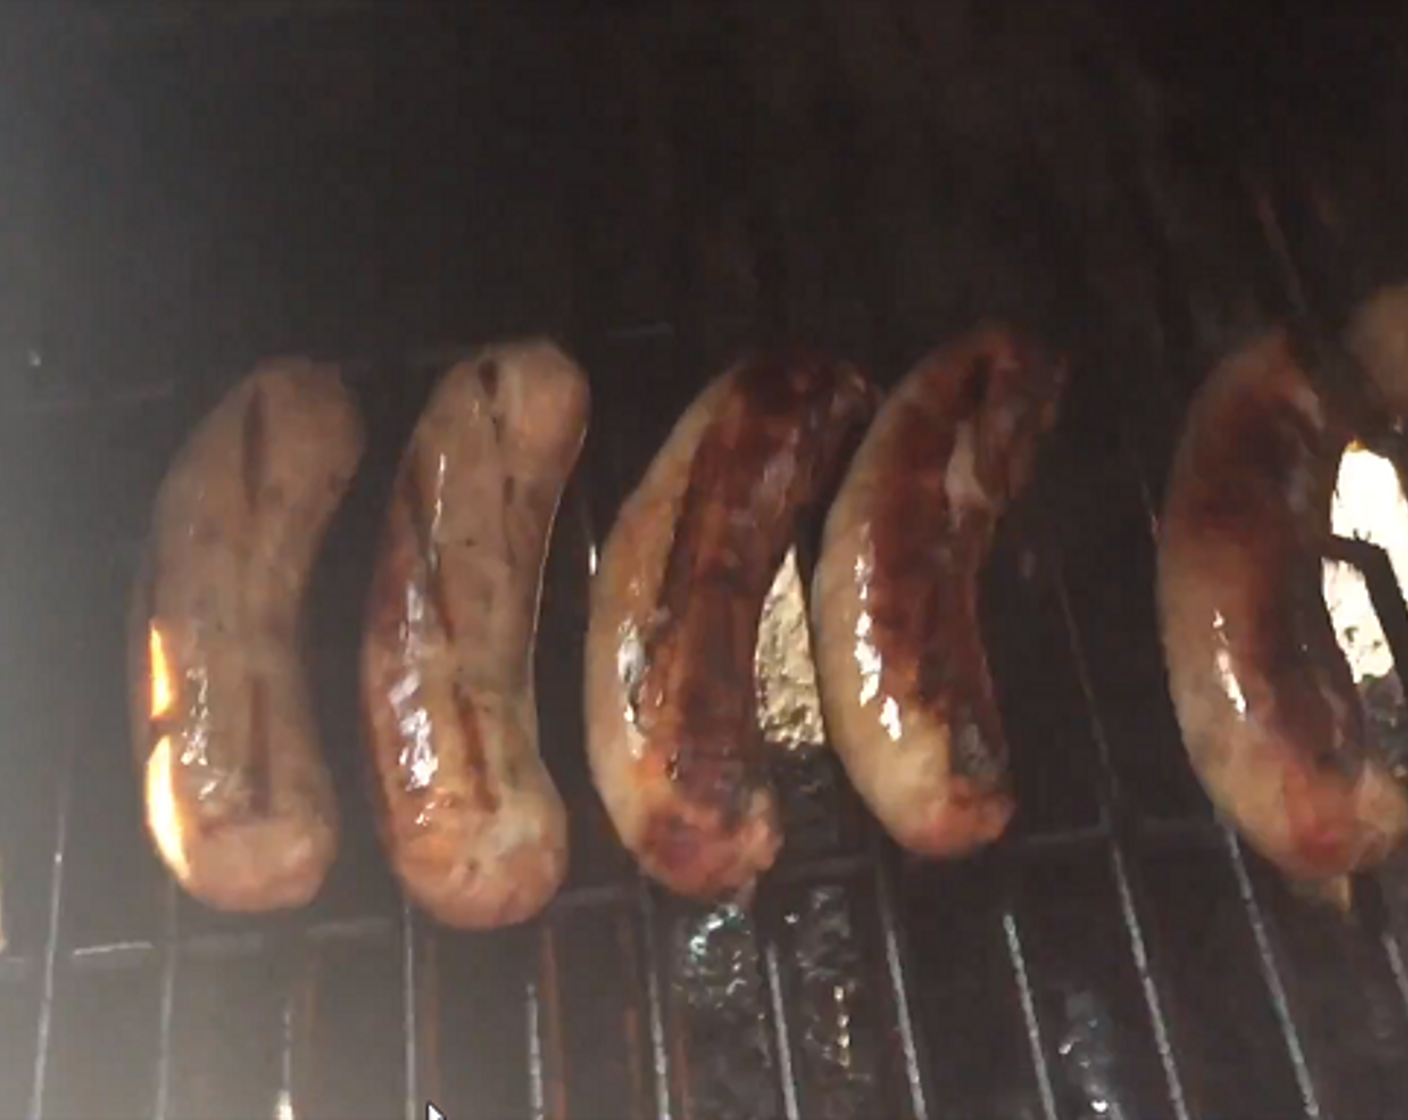 step 4 Grill Bratwurst (12) about 3 minutes on each side to crisp the outer skin.